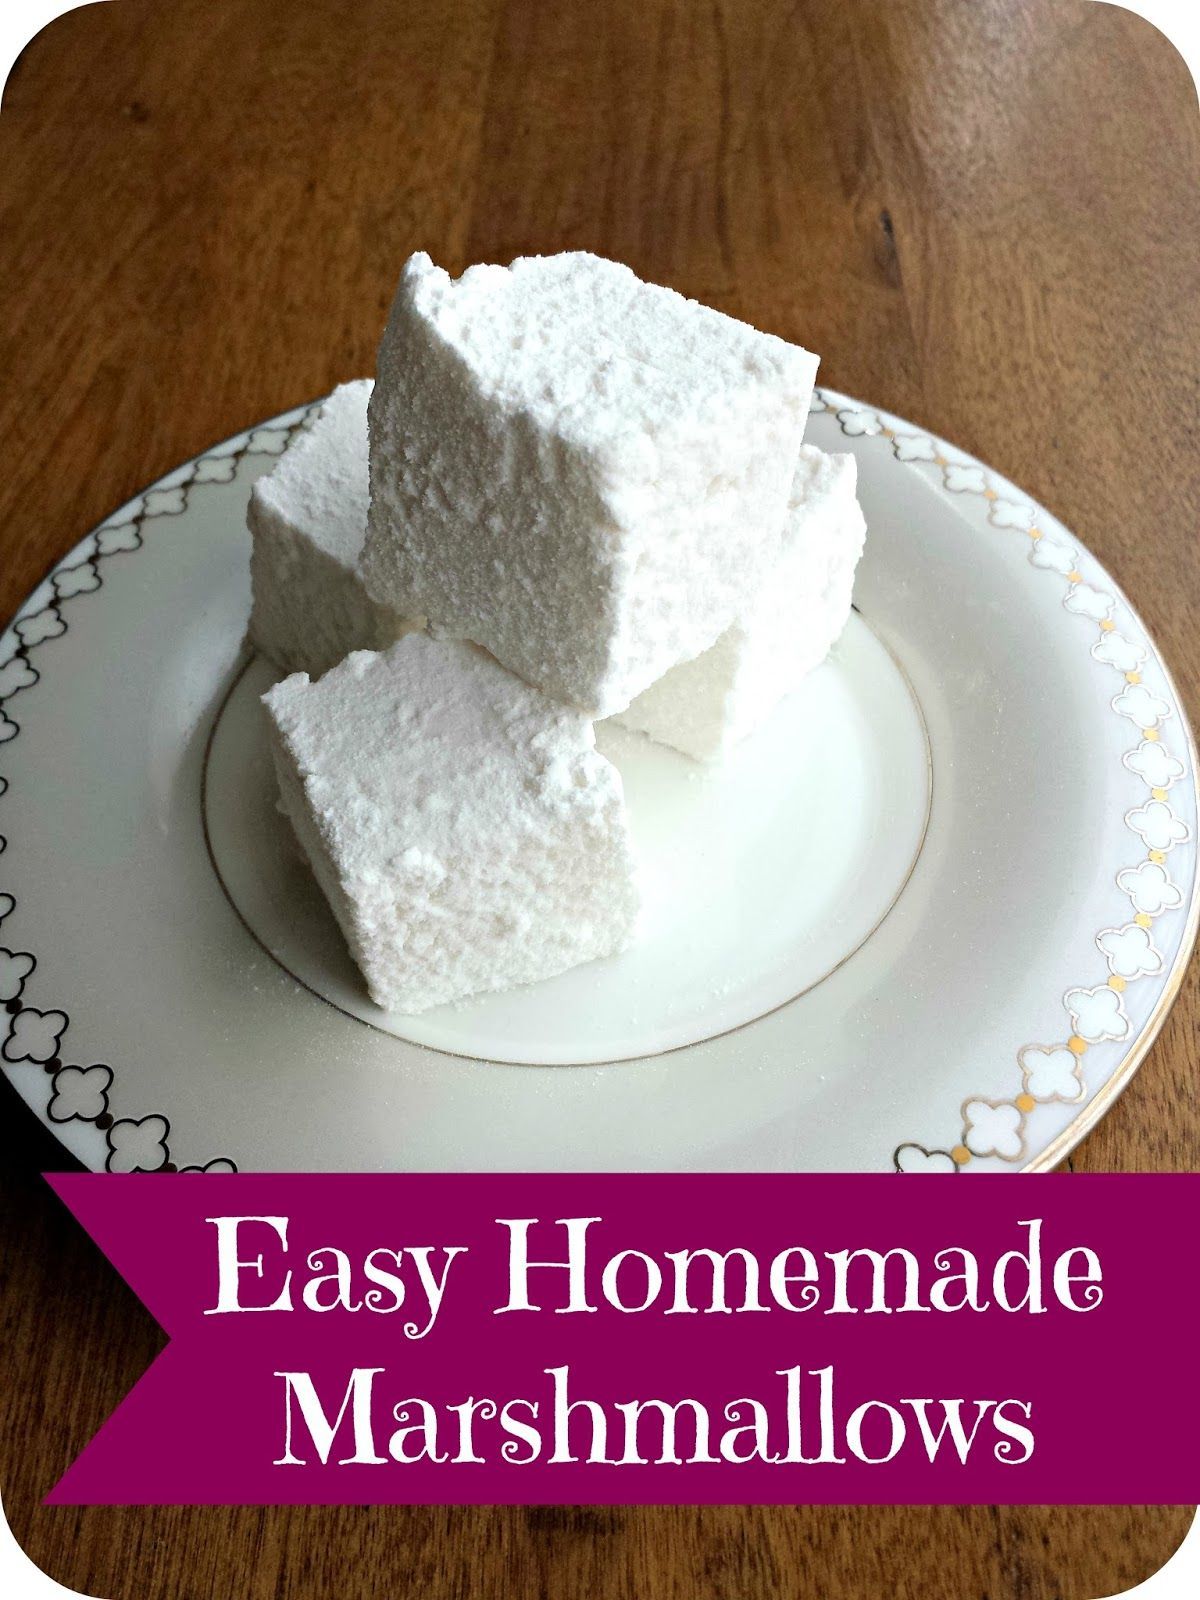 Super easy homemade marshmallow recipe  No corn syrup no candy thermometer